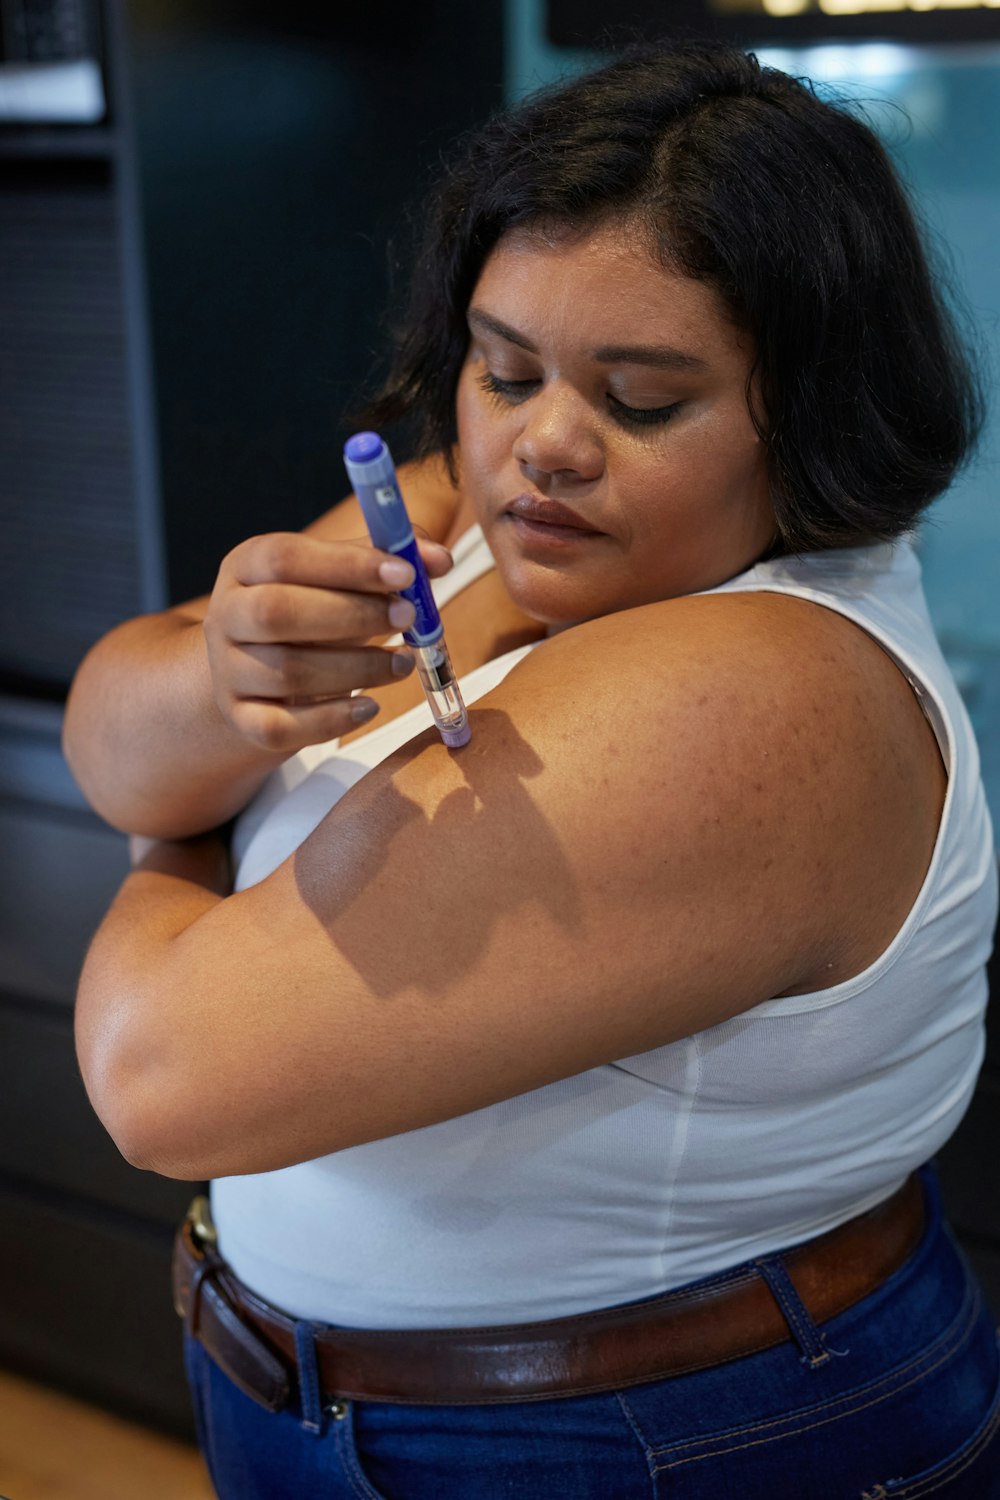 a person with an insulin injection pen